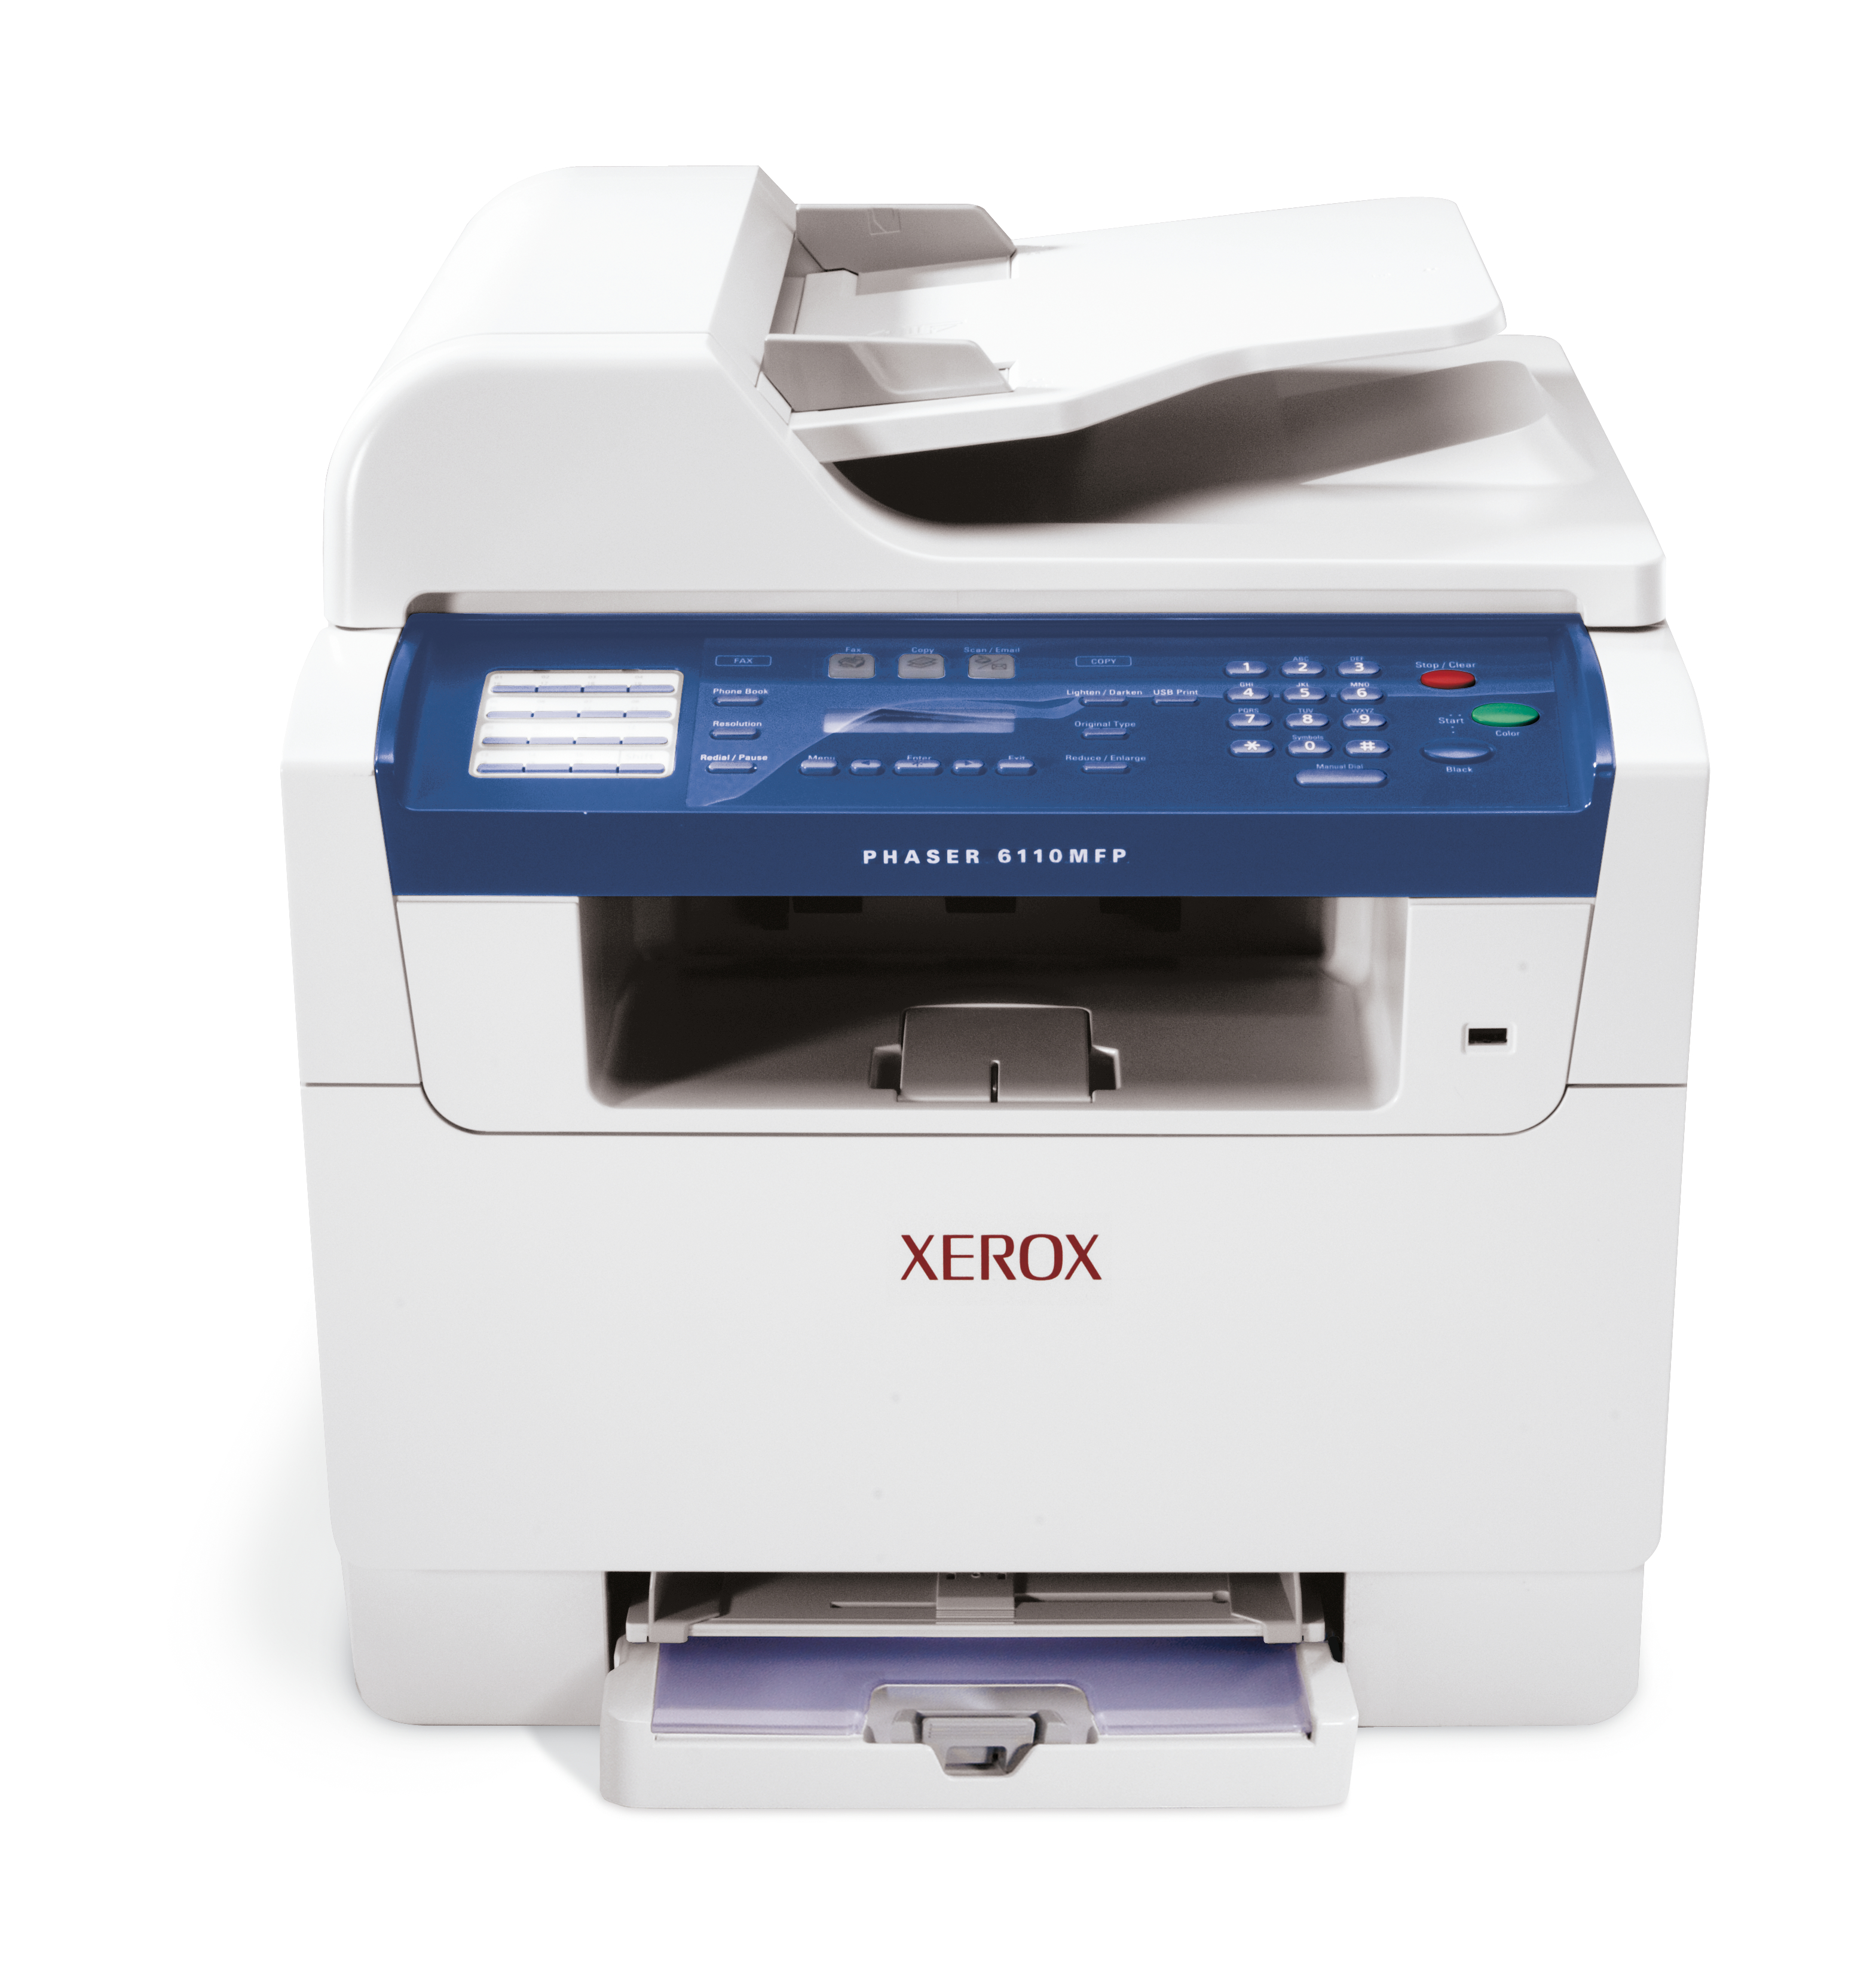 Phaser 6110Mfp Colour Multifunction System With Print/Copy/Scan/Fax, 4 Ppm  Colour, 16 Ppm Black And White,Gdi, Usb/Network, Adf, 128 Mb, 150 Sheet  Input, 220V 6110MFPV/X - Xerox